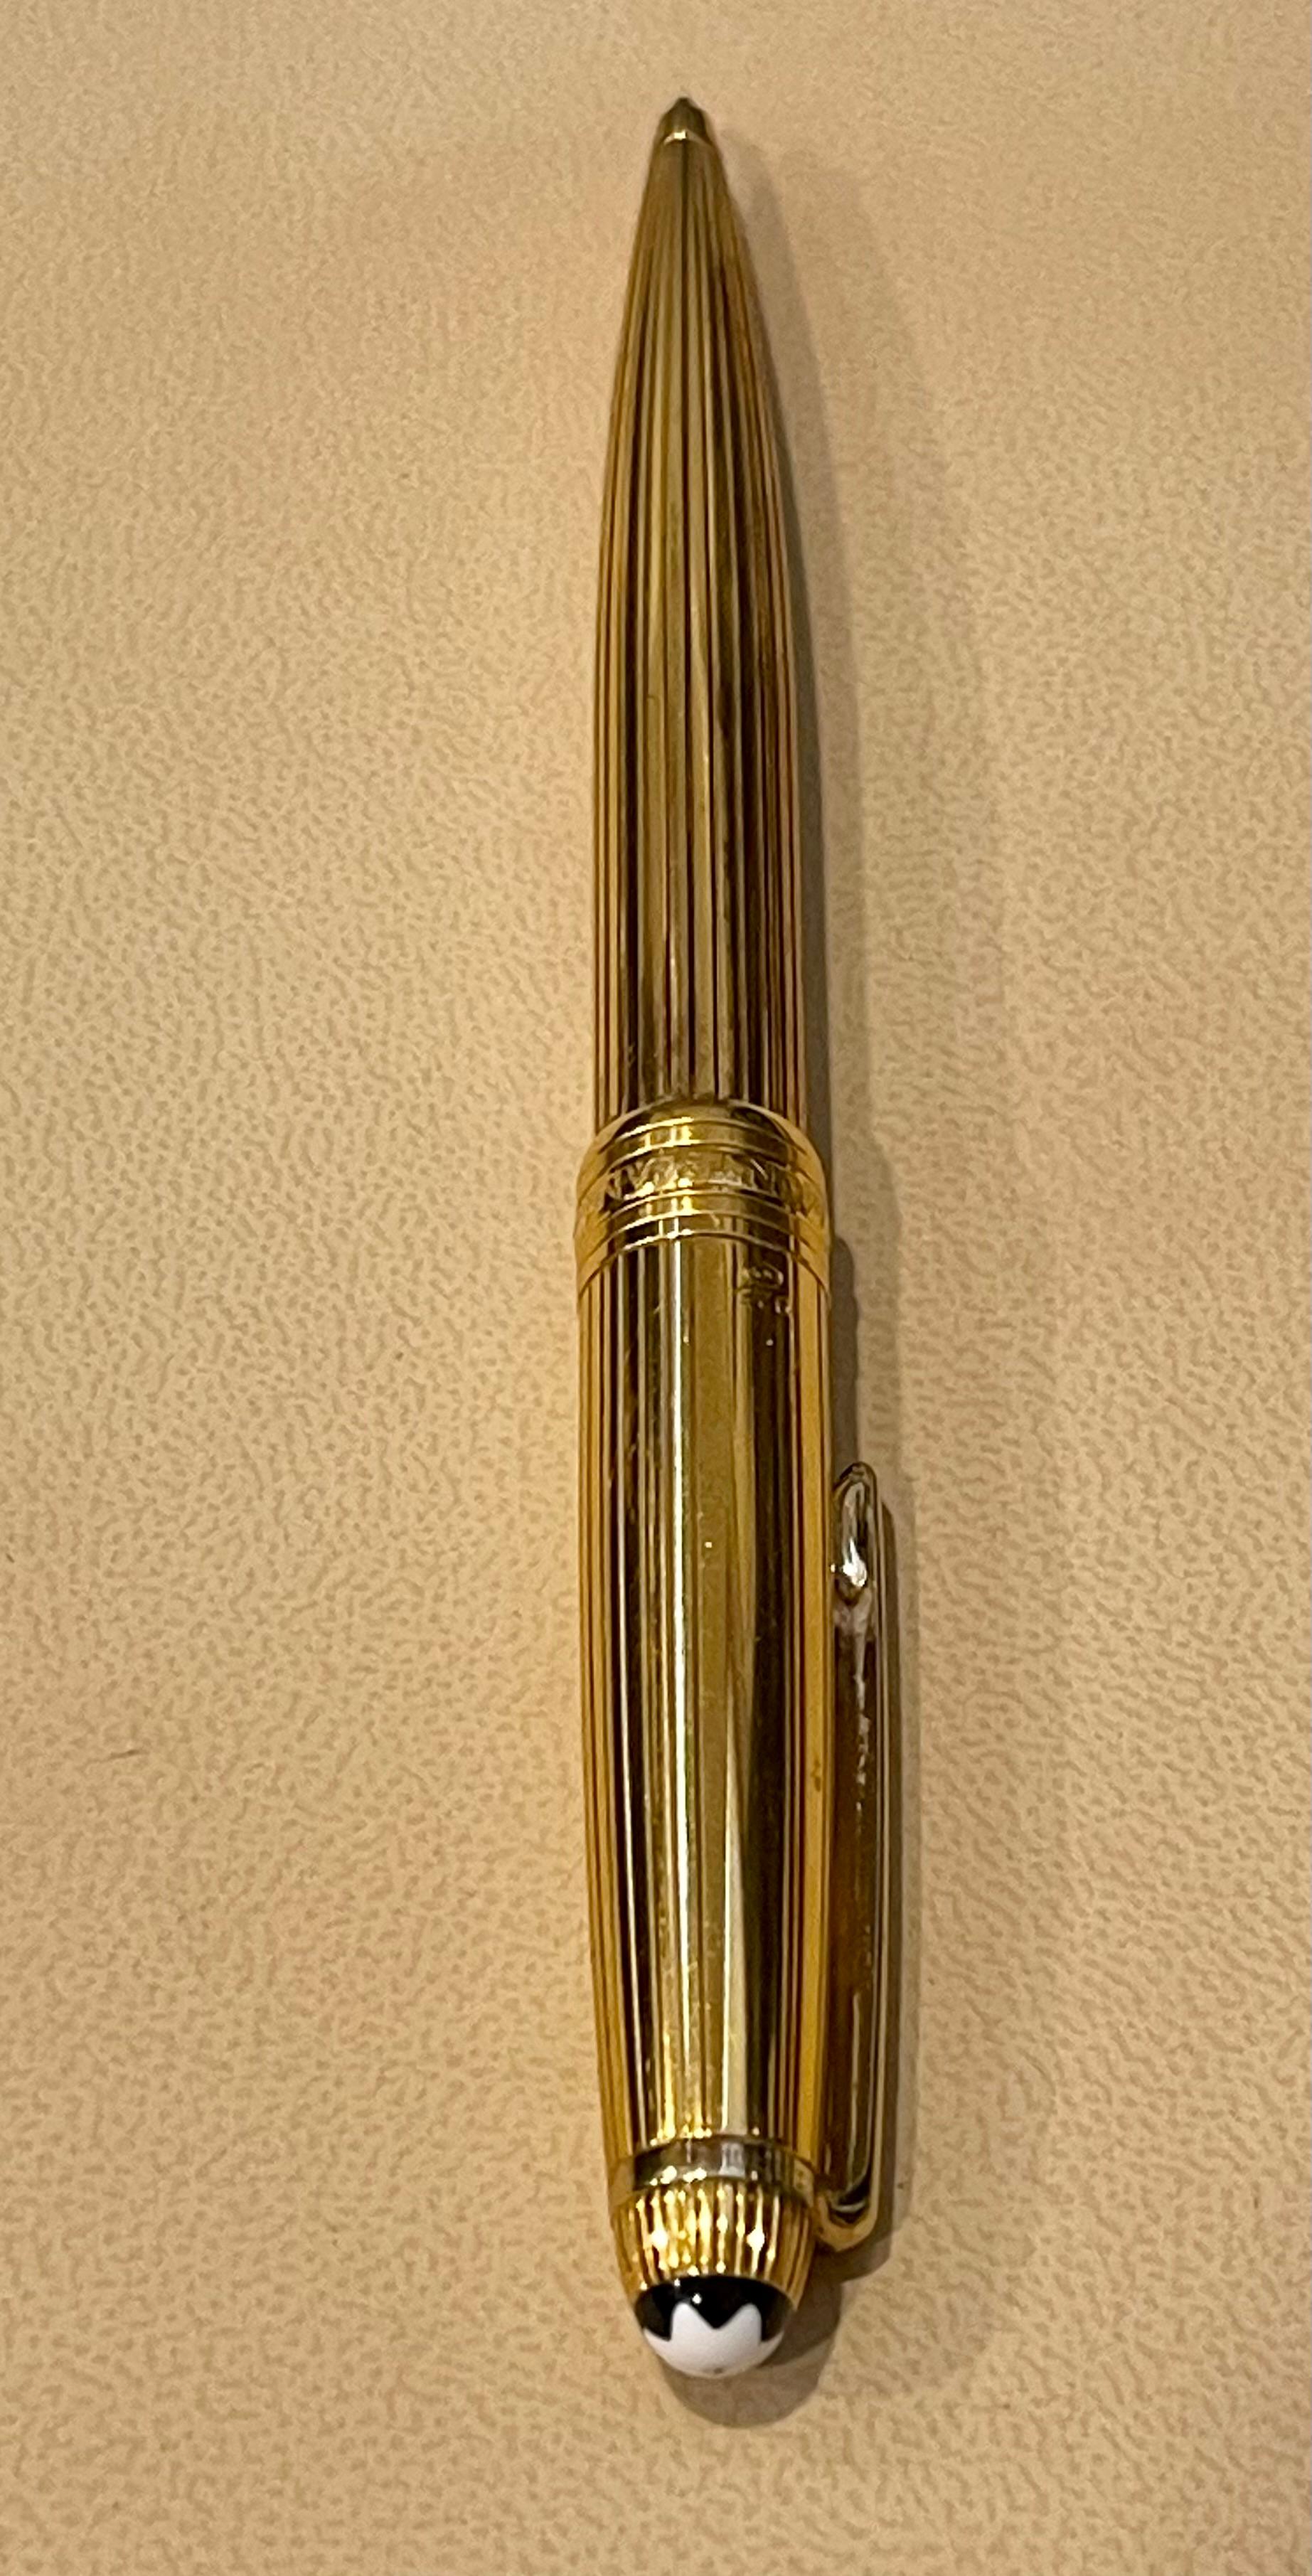  Pre owned but in excellent condition, Its is working condition
Stamped Serial # CI  607062 , Germany, Montblanc Meisterstück, 925 , 
The  Meisterstuck all gold coated ,details and surmounted by the white star emblem. IT IS GOLD OVER SILVER .
There